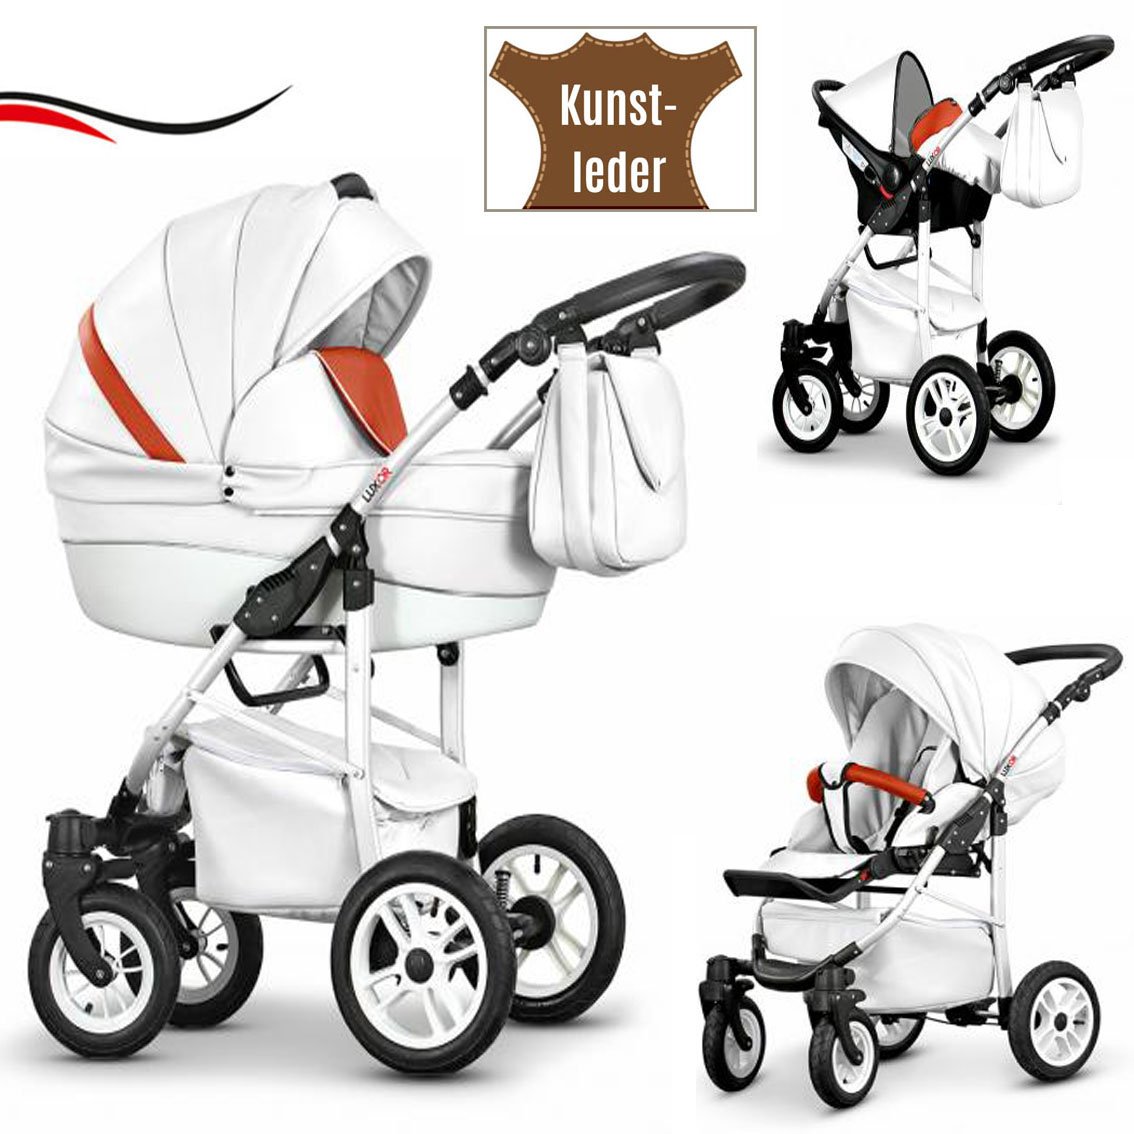 16-Piece Quality Travel System 3-in-1 \"Cosmo-Eco\" - Faux Leather: Pushchair + Buggy + Car Seat + Swivel Wheels - Mega Equipment - All Inclusive Package in 37 Great Colours